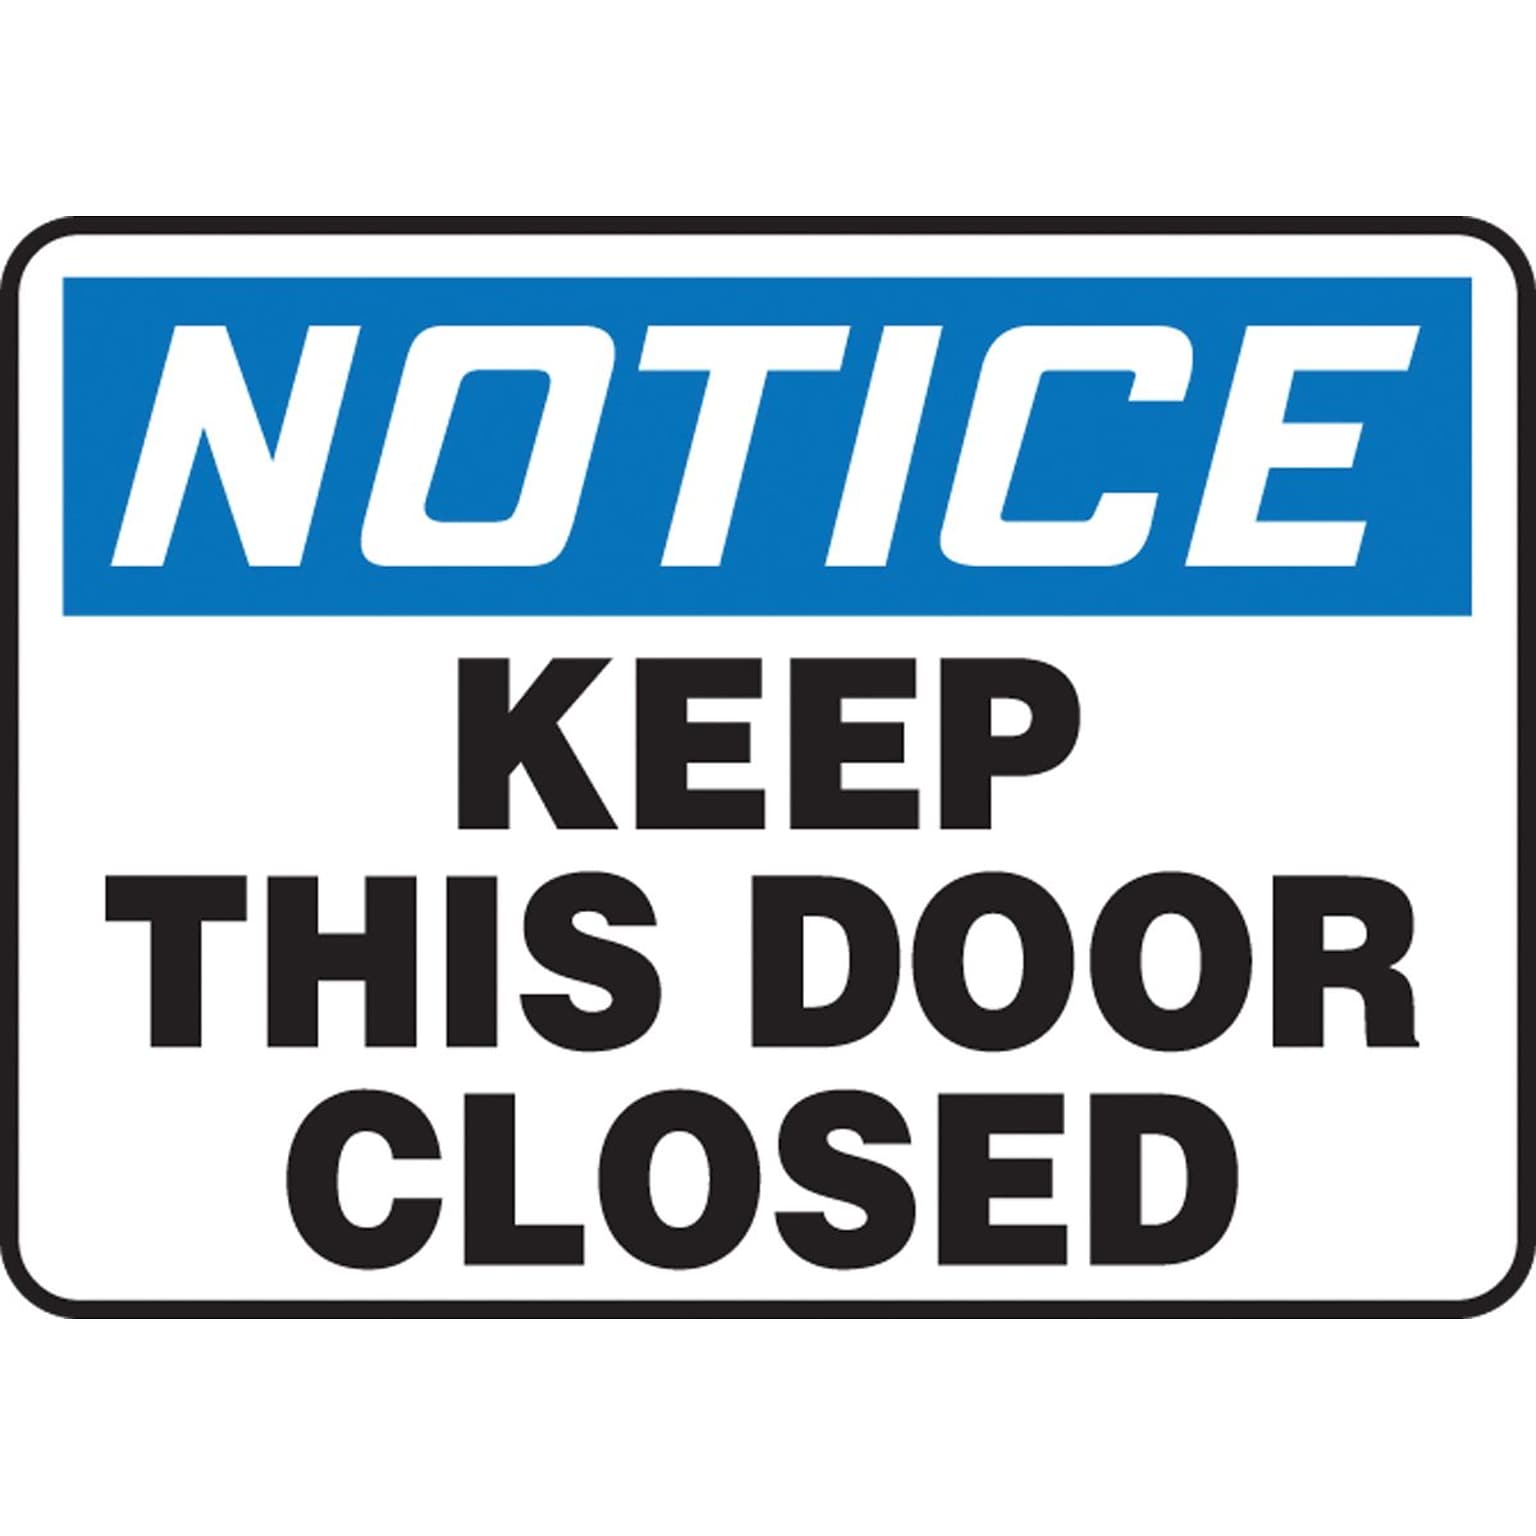 Accuform 7 x 10 Aluminum Safety Sign NOTICE KEEP THIS DOOR CLOSED, Blue/Black On White (MABR823VA)